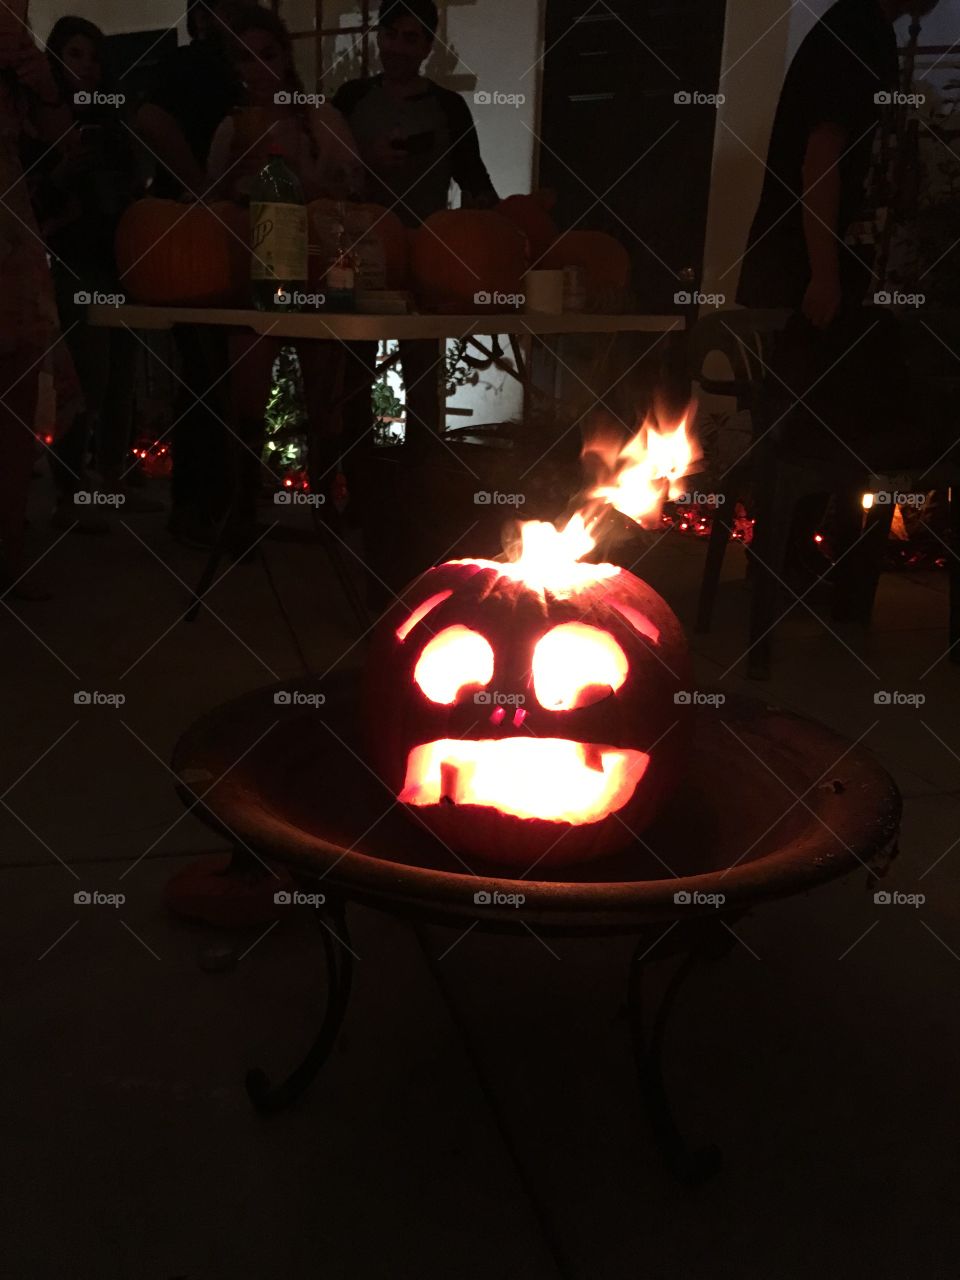 Scared pumpkins on fire at Halloween 